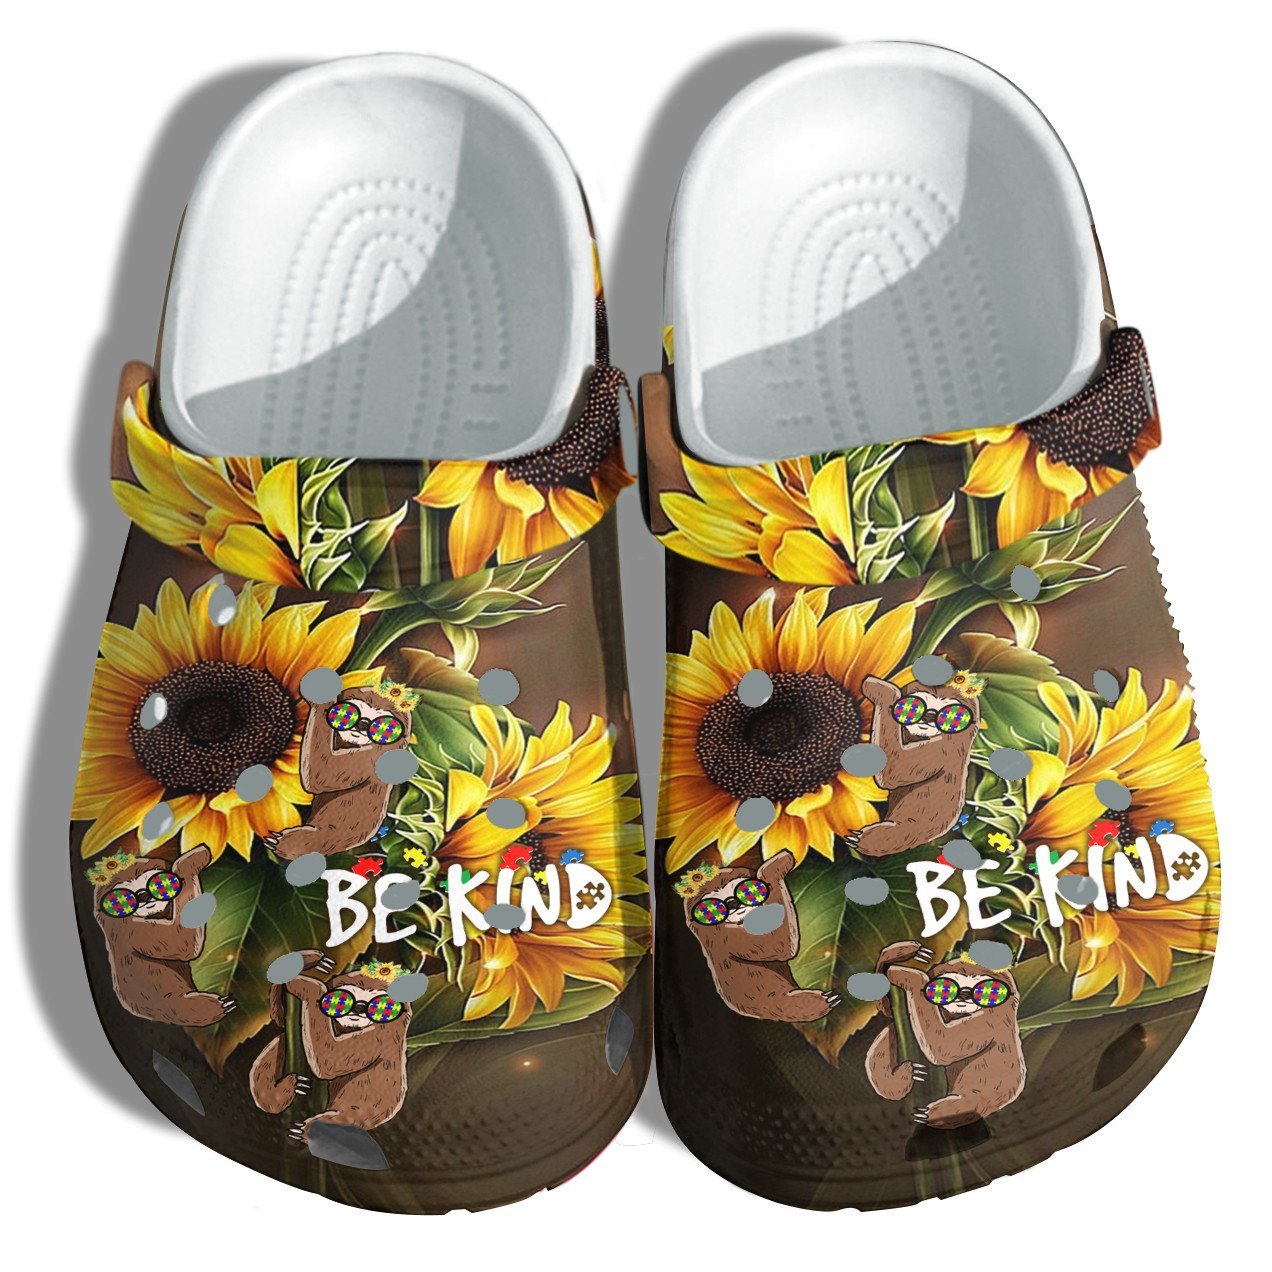 Sunflower Sloth Autism Be Kind Crocs Shoes - Autism Awareness Sloth Funny Shoes Croc Clogs Gifts Mother Day